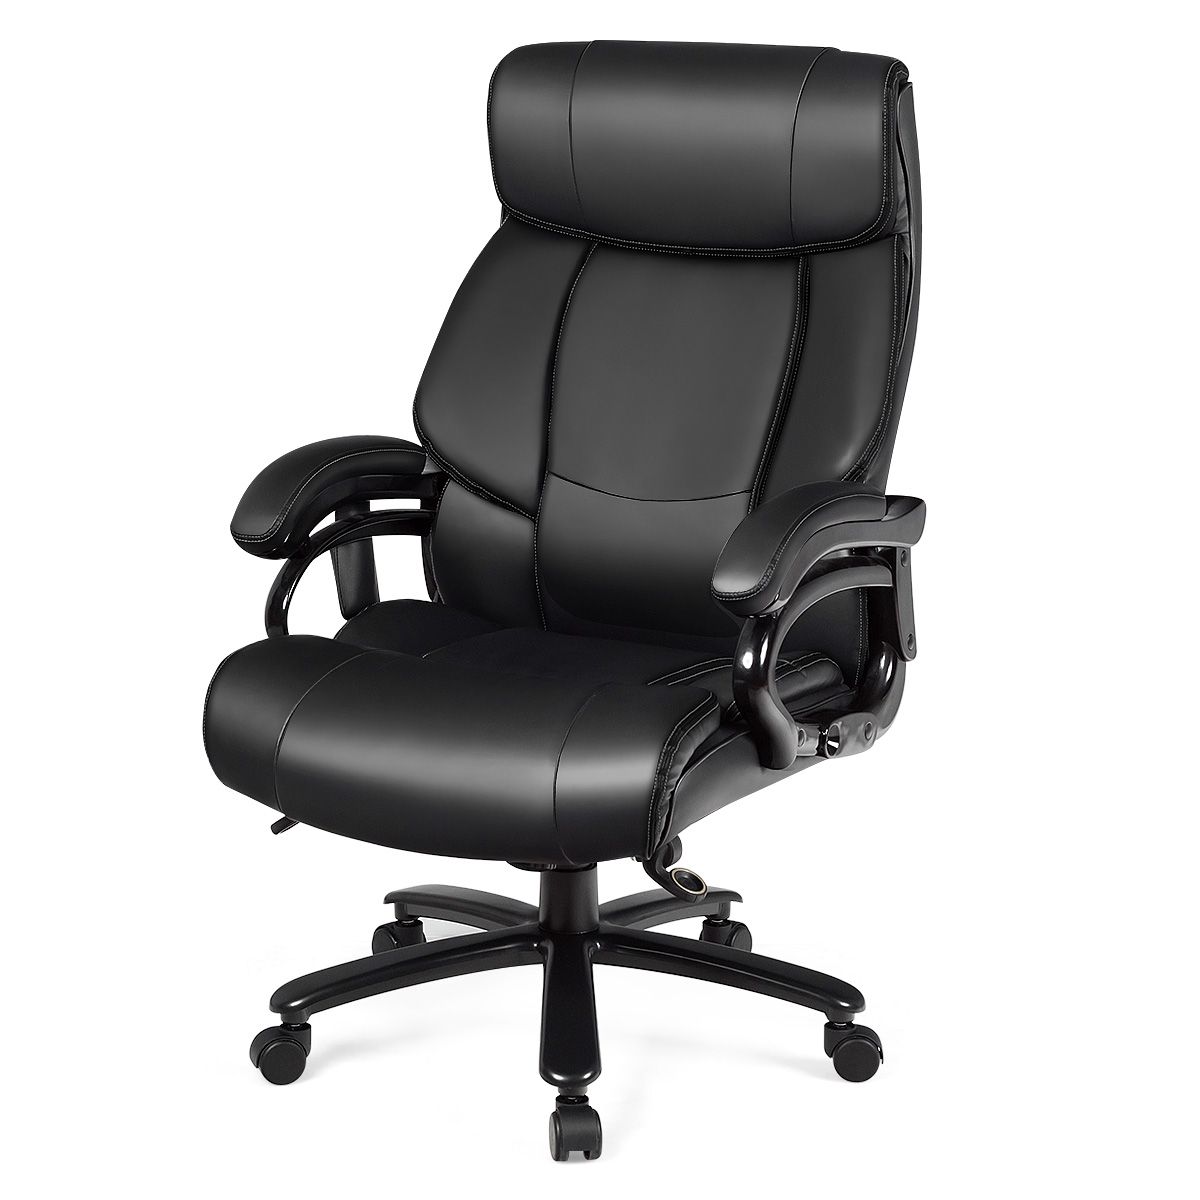 PU Leather Massage Office Chair with Thick Foam Cushion